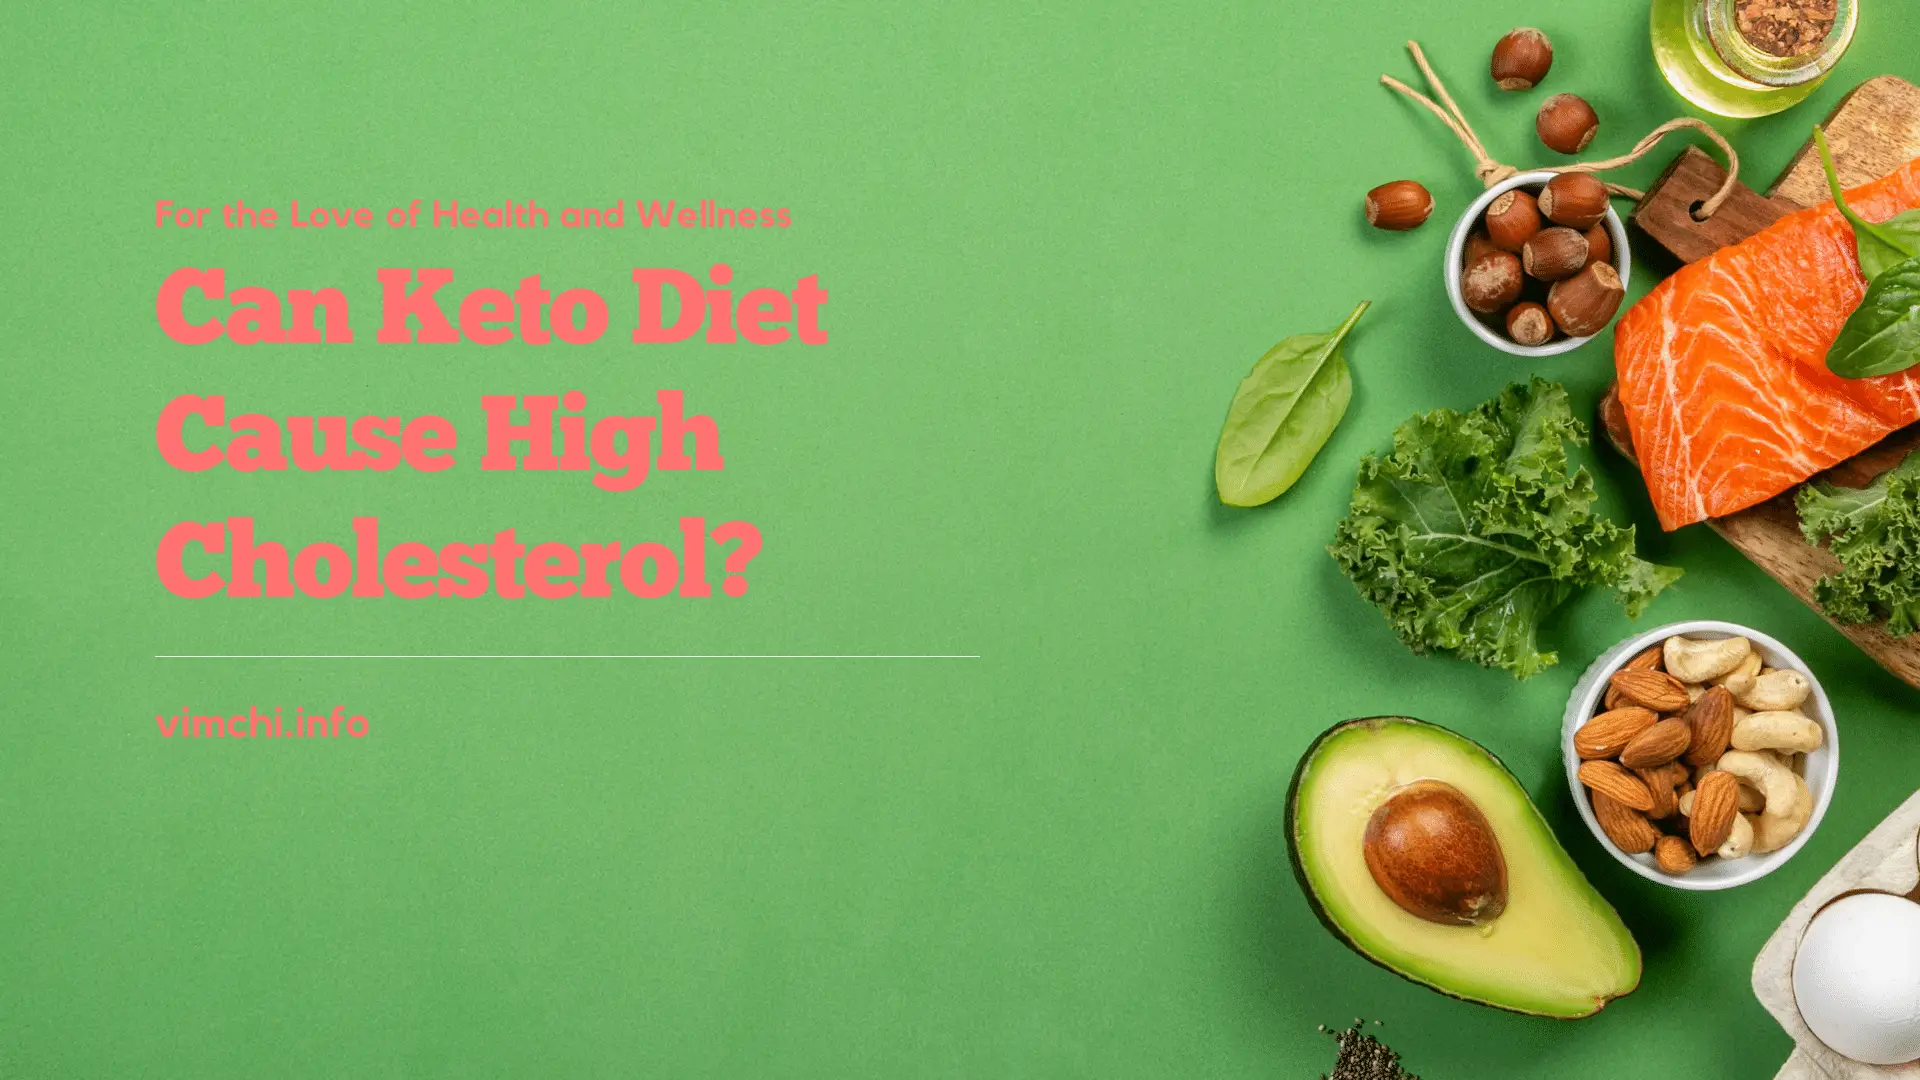 can keto diet cause high cholesterol